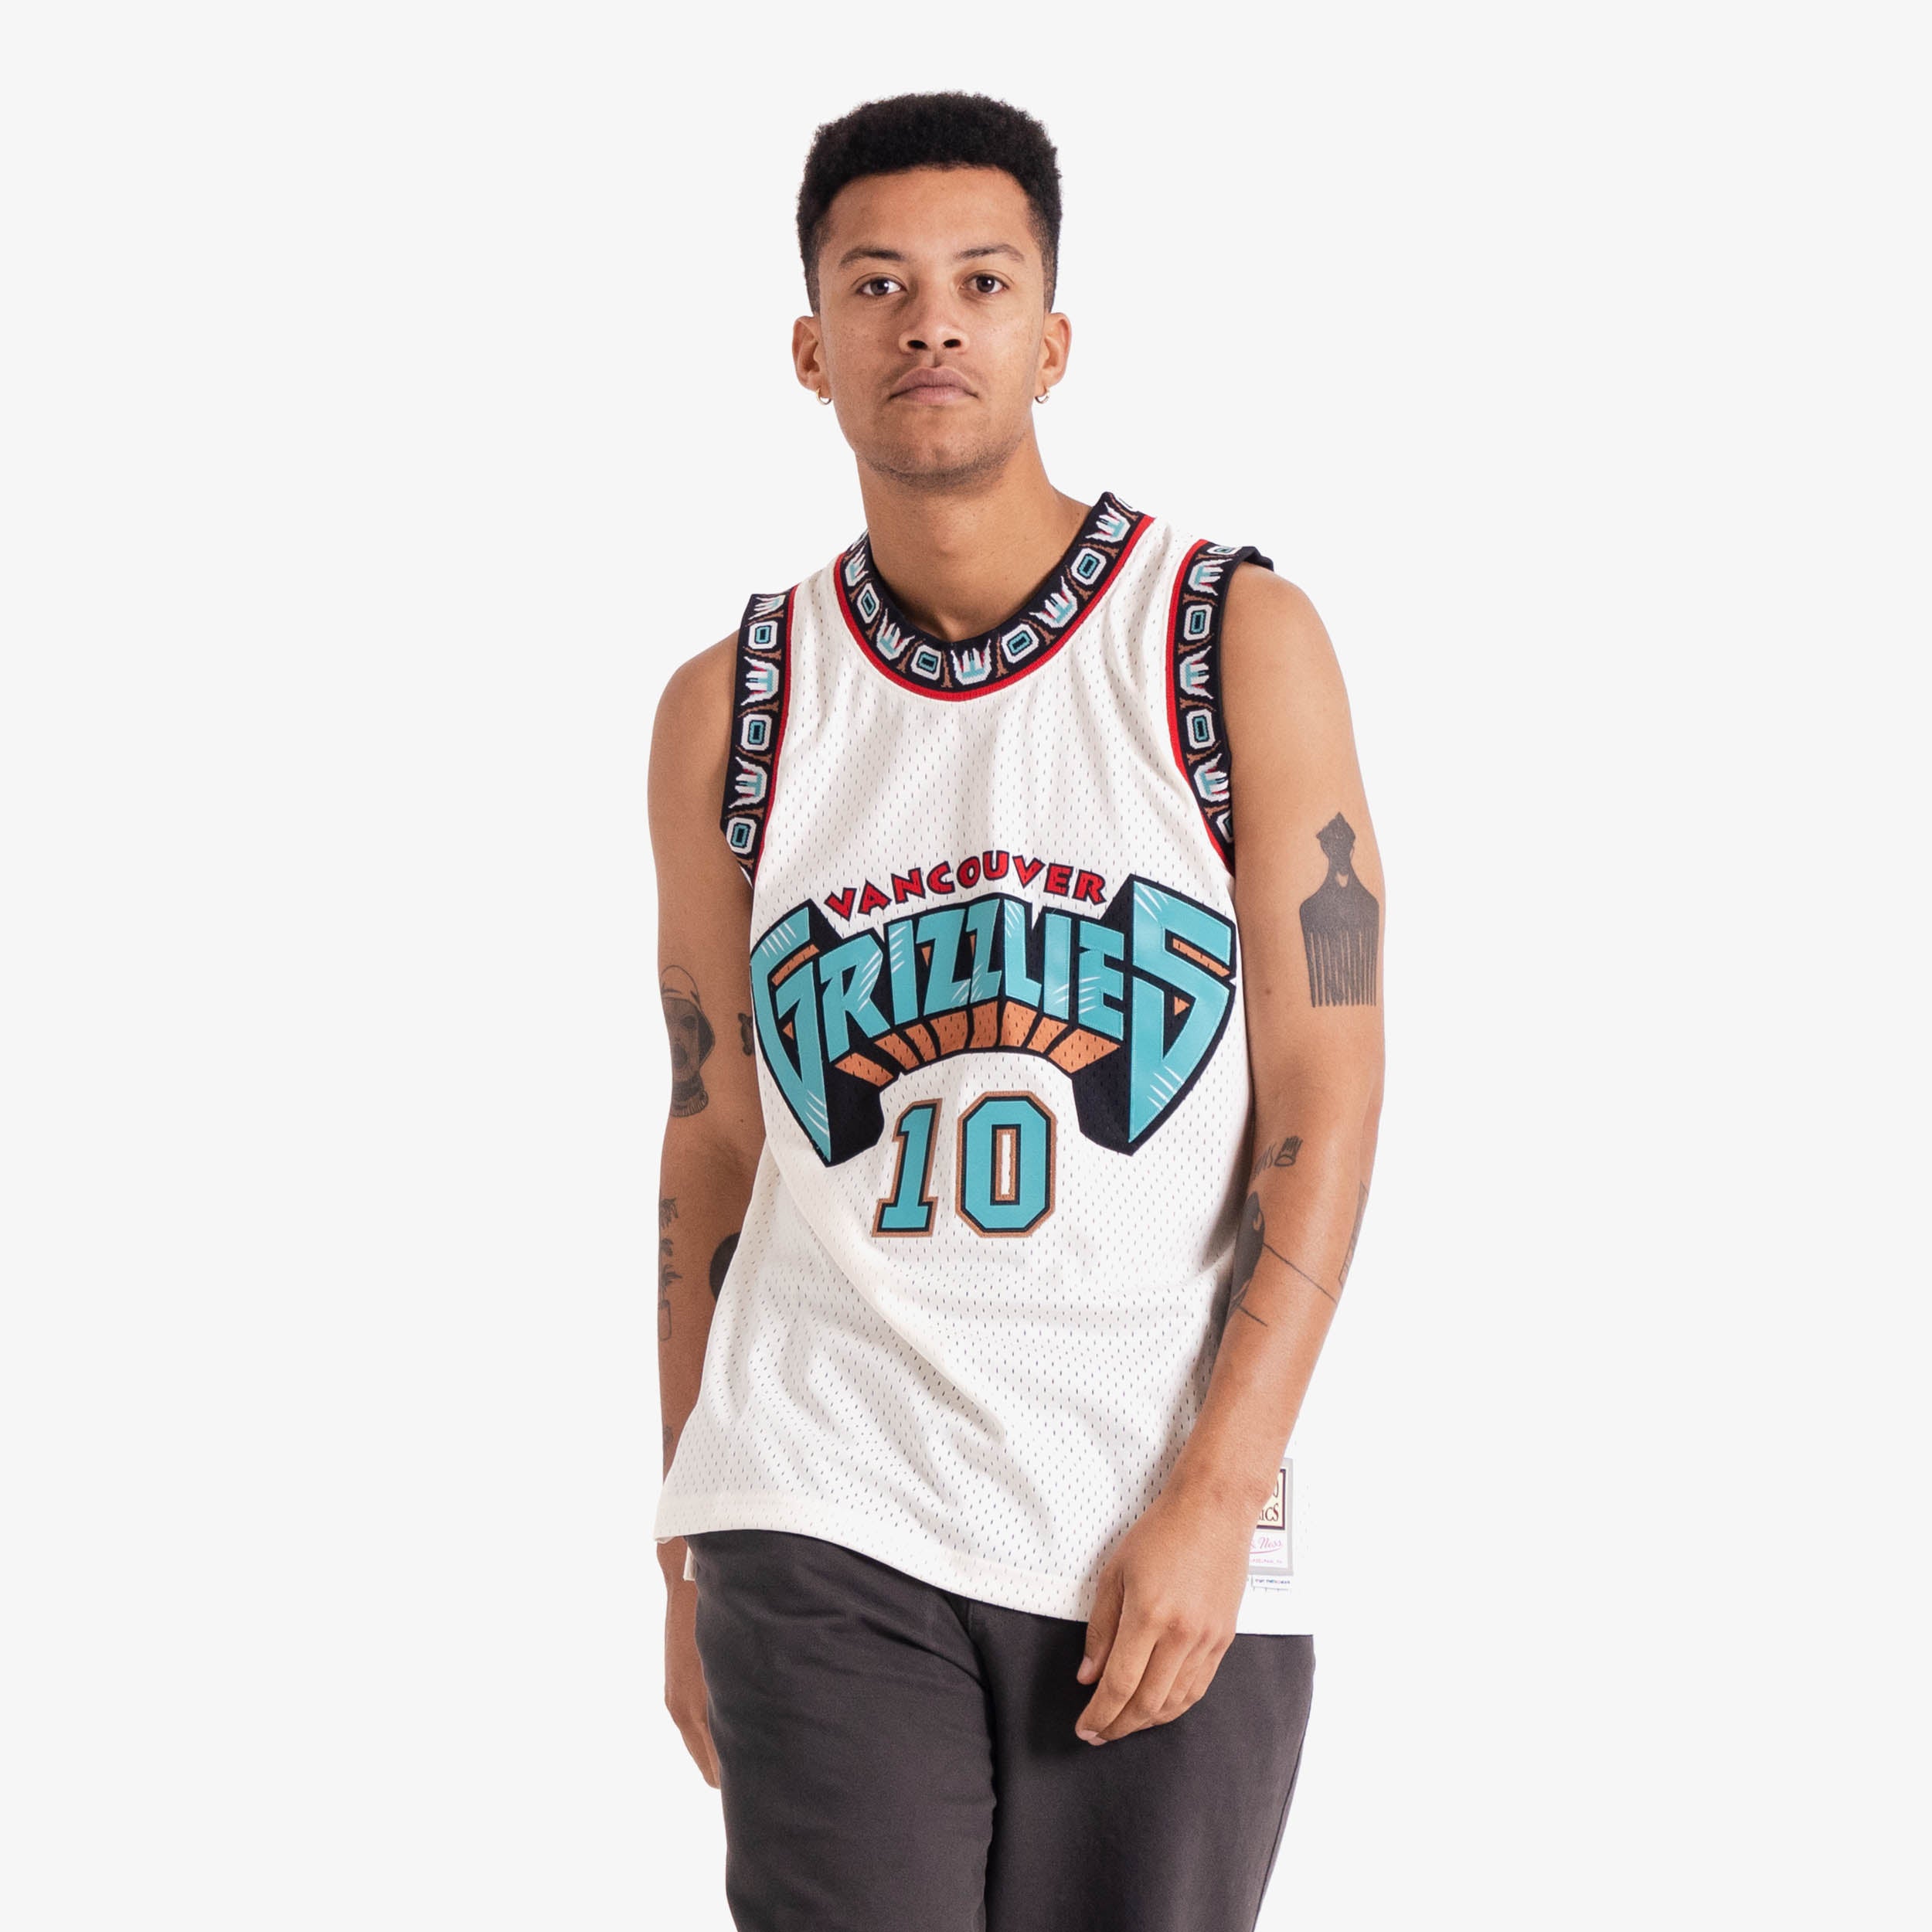 Mike Bibby Vancouver Grizzlies HWC Throwback NBA Off White, 52% OFF